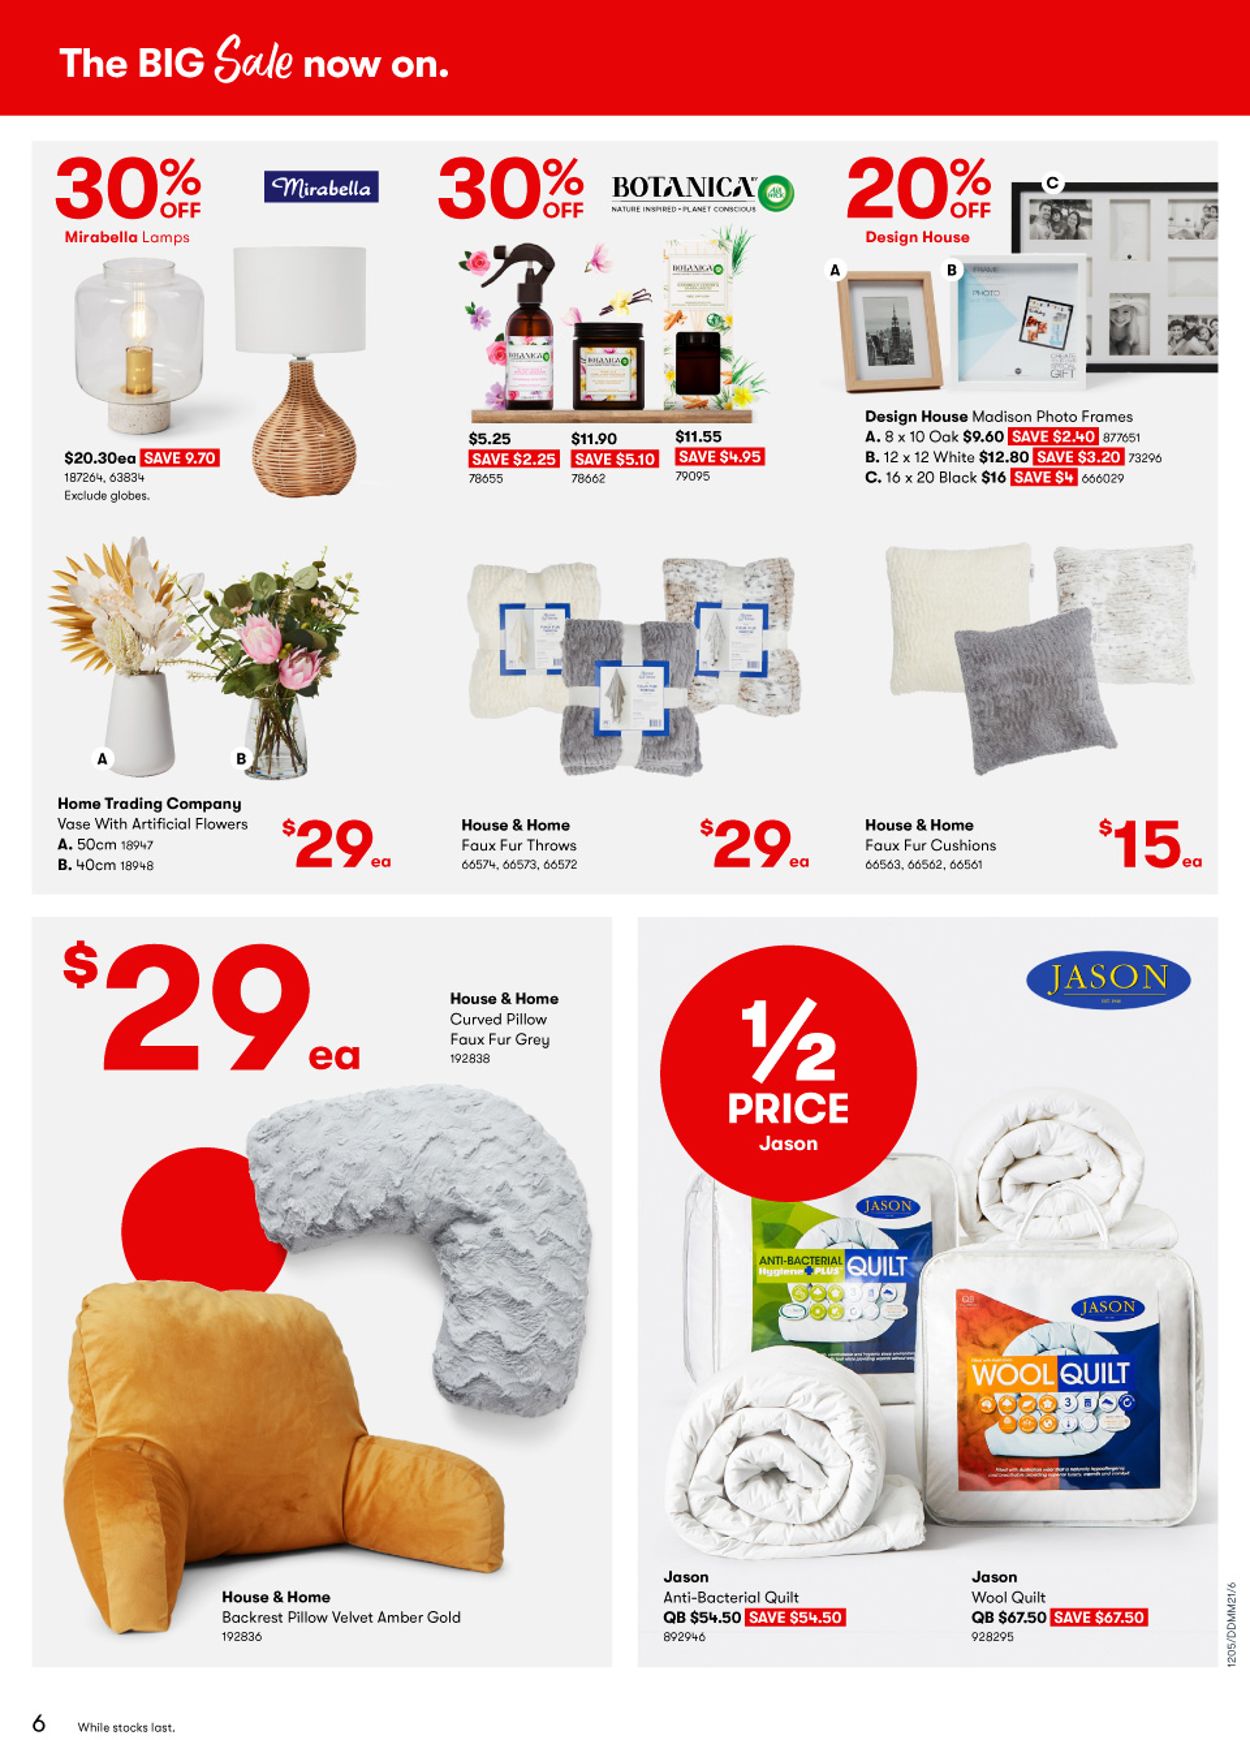 BIG W Catalogue from 26/05/2022